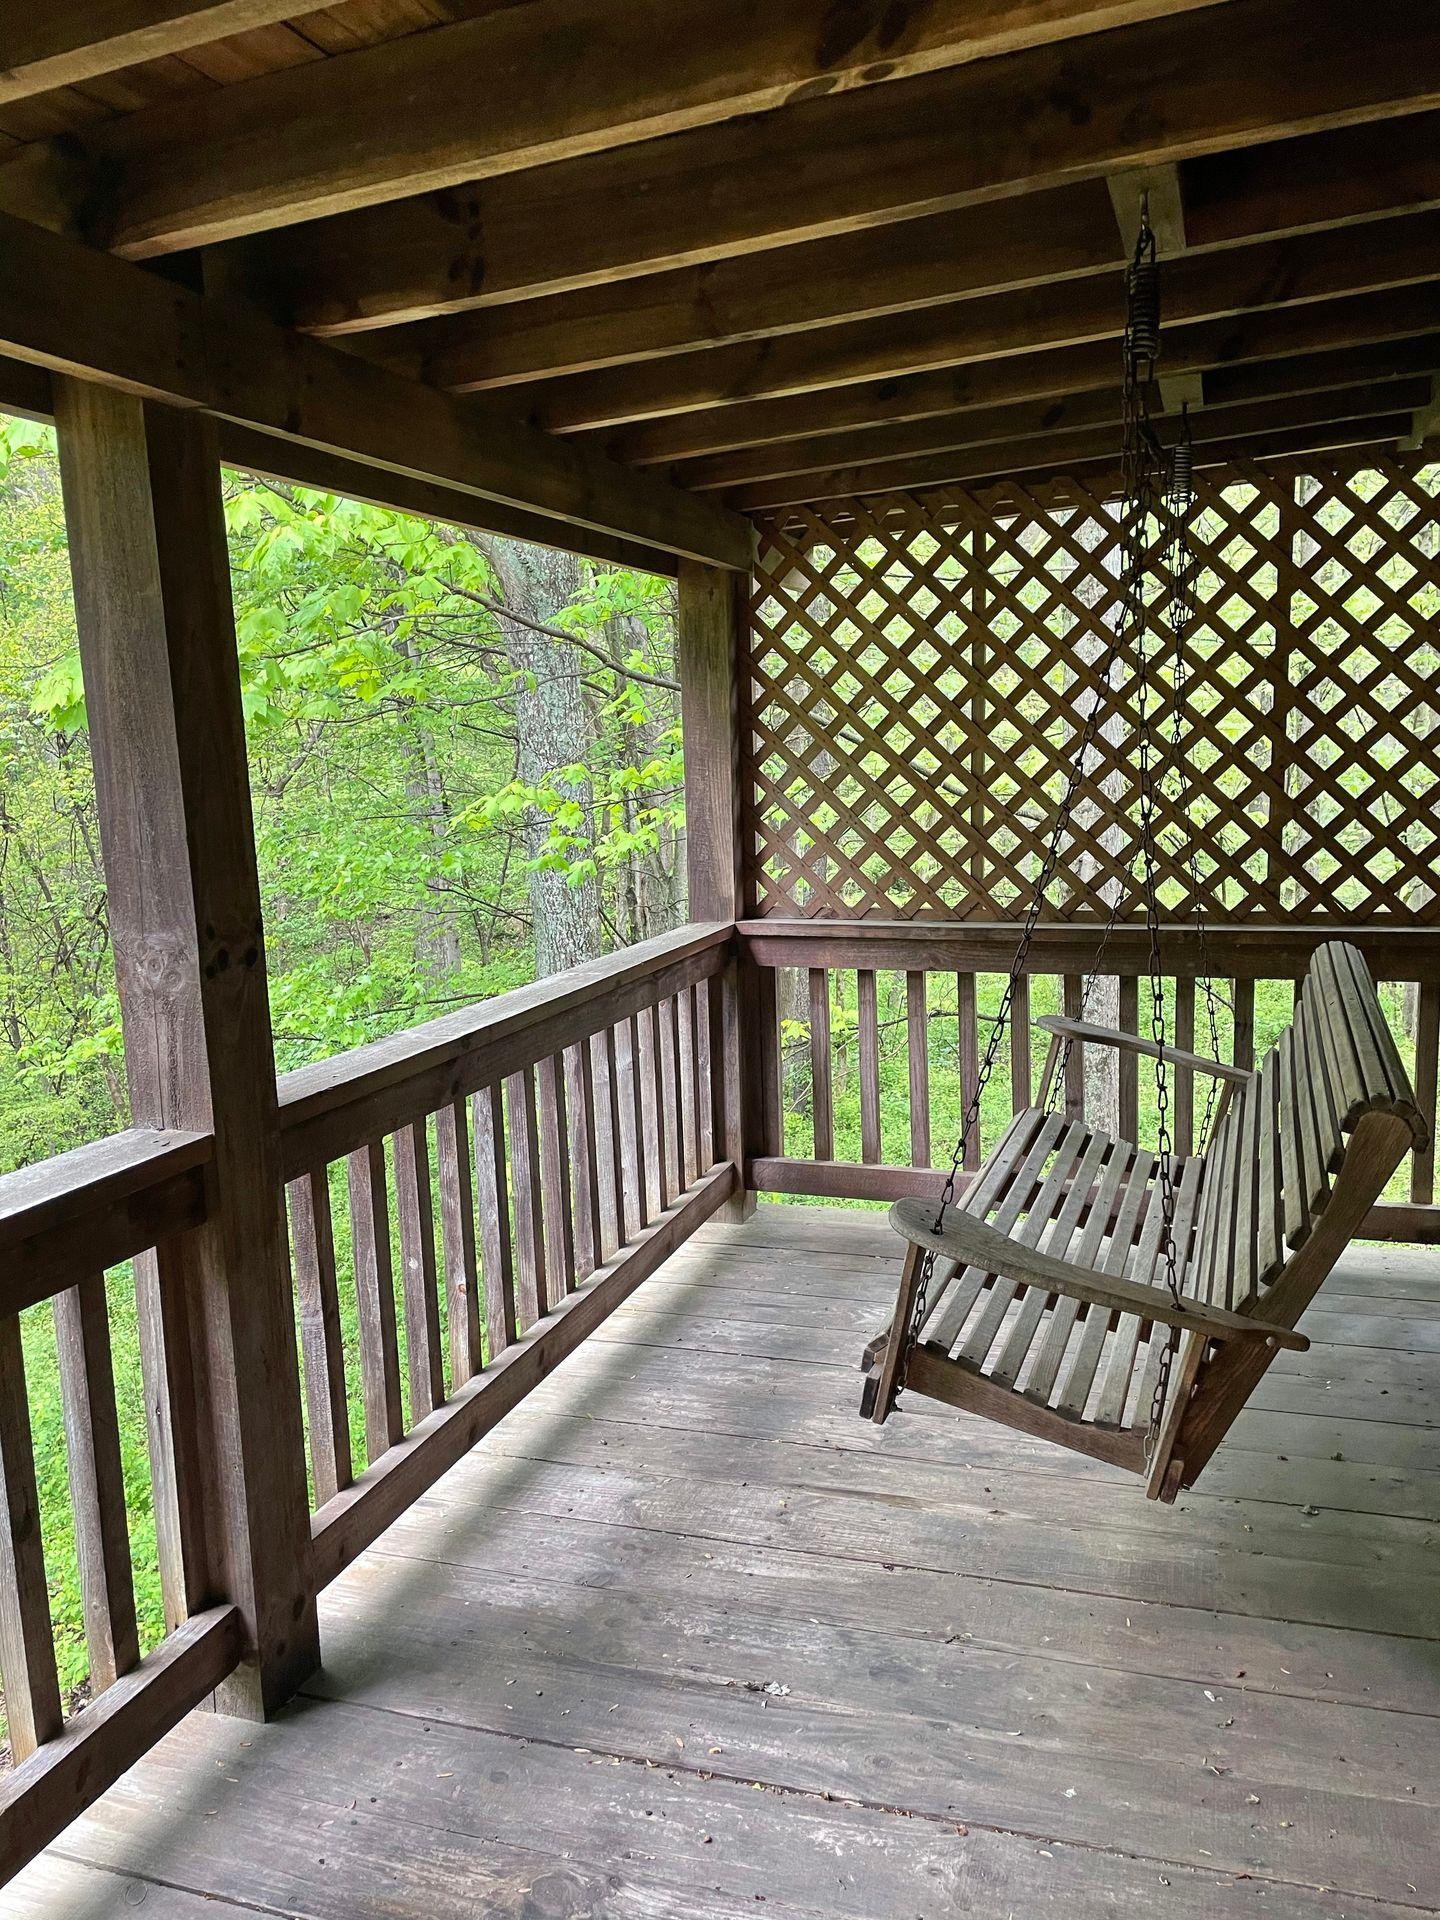 A wooden porch with a swinging bench at a cabin in Hocking Hills.